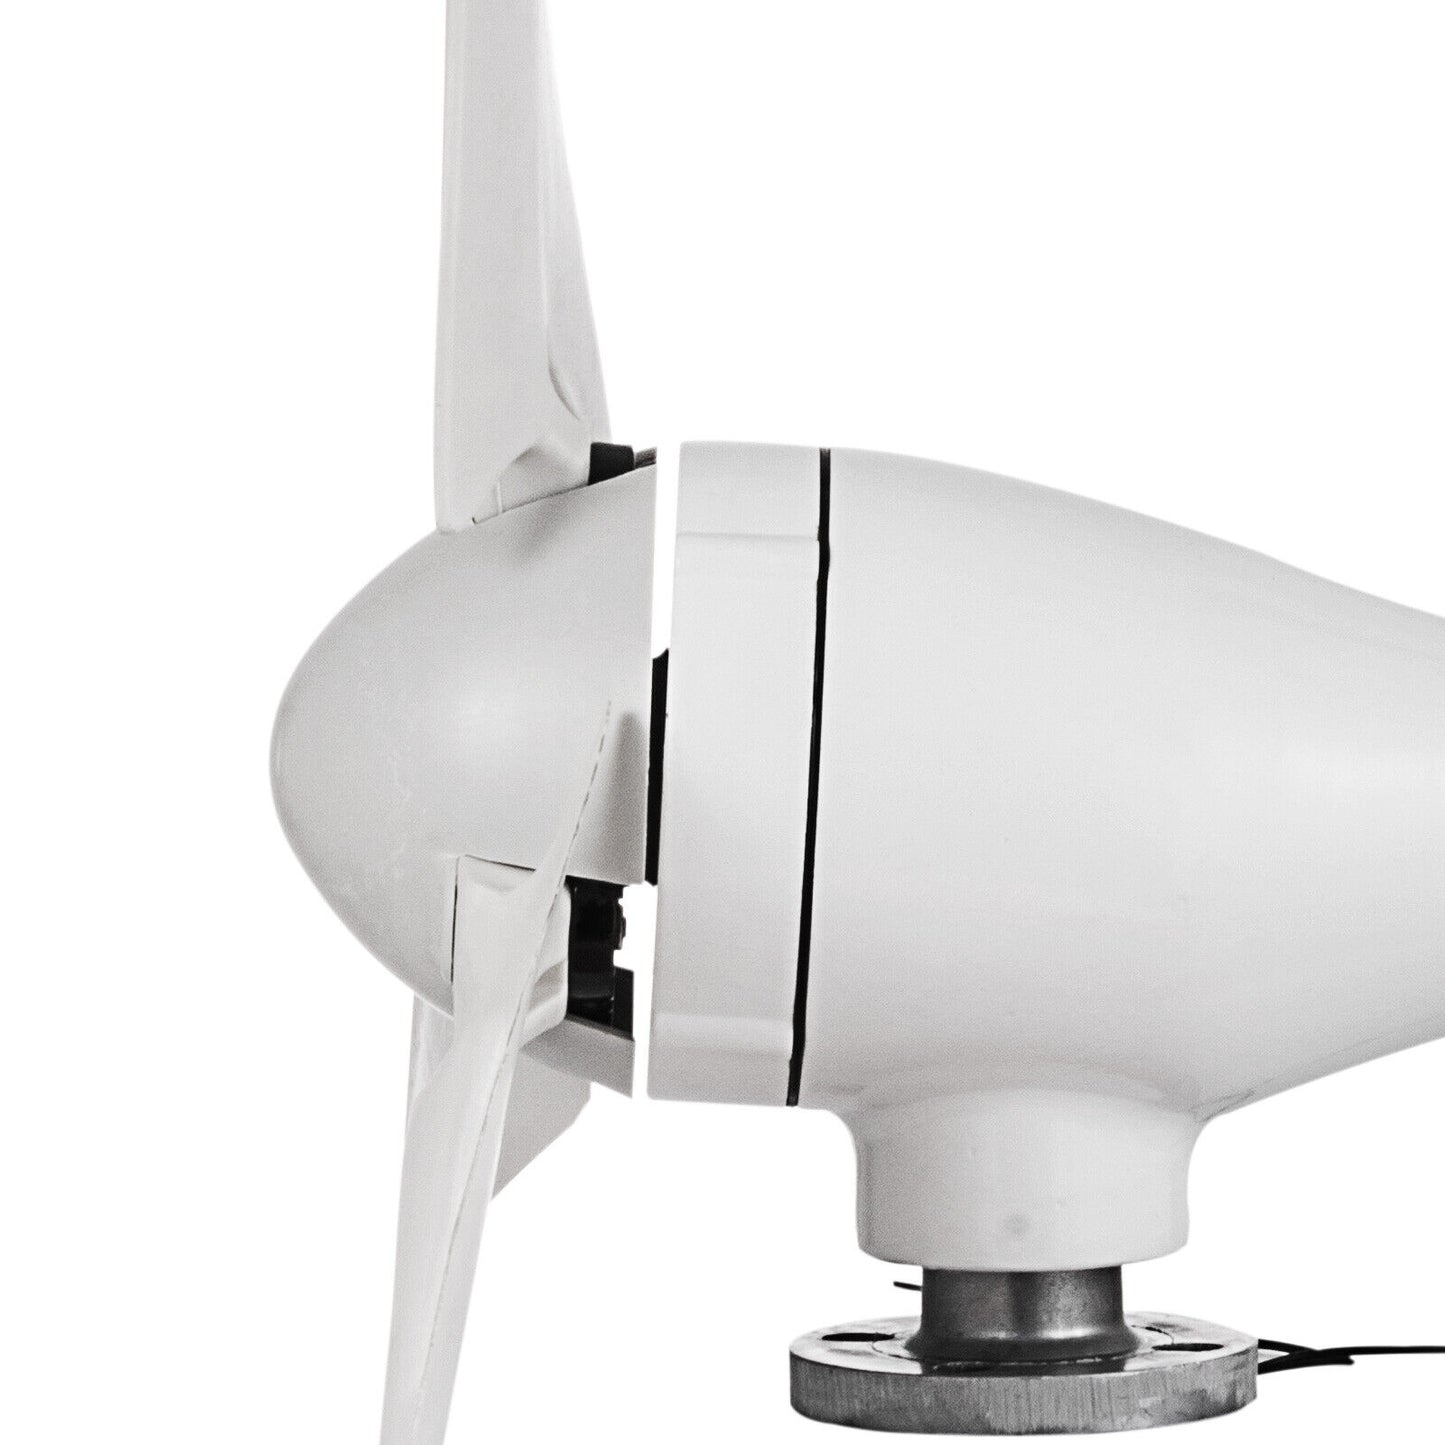 400W Wind Turbine Generator Unit Kit 3 Blades With DC12V Power Charge Controller